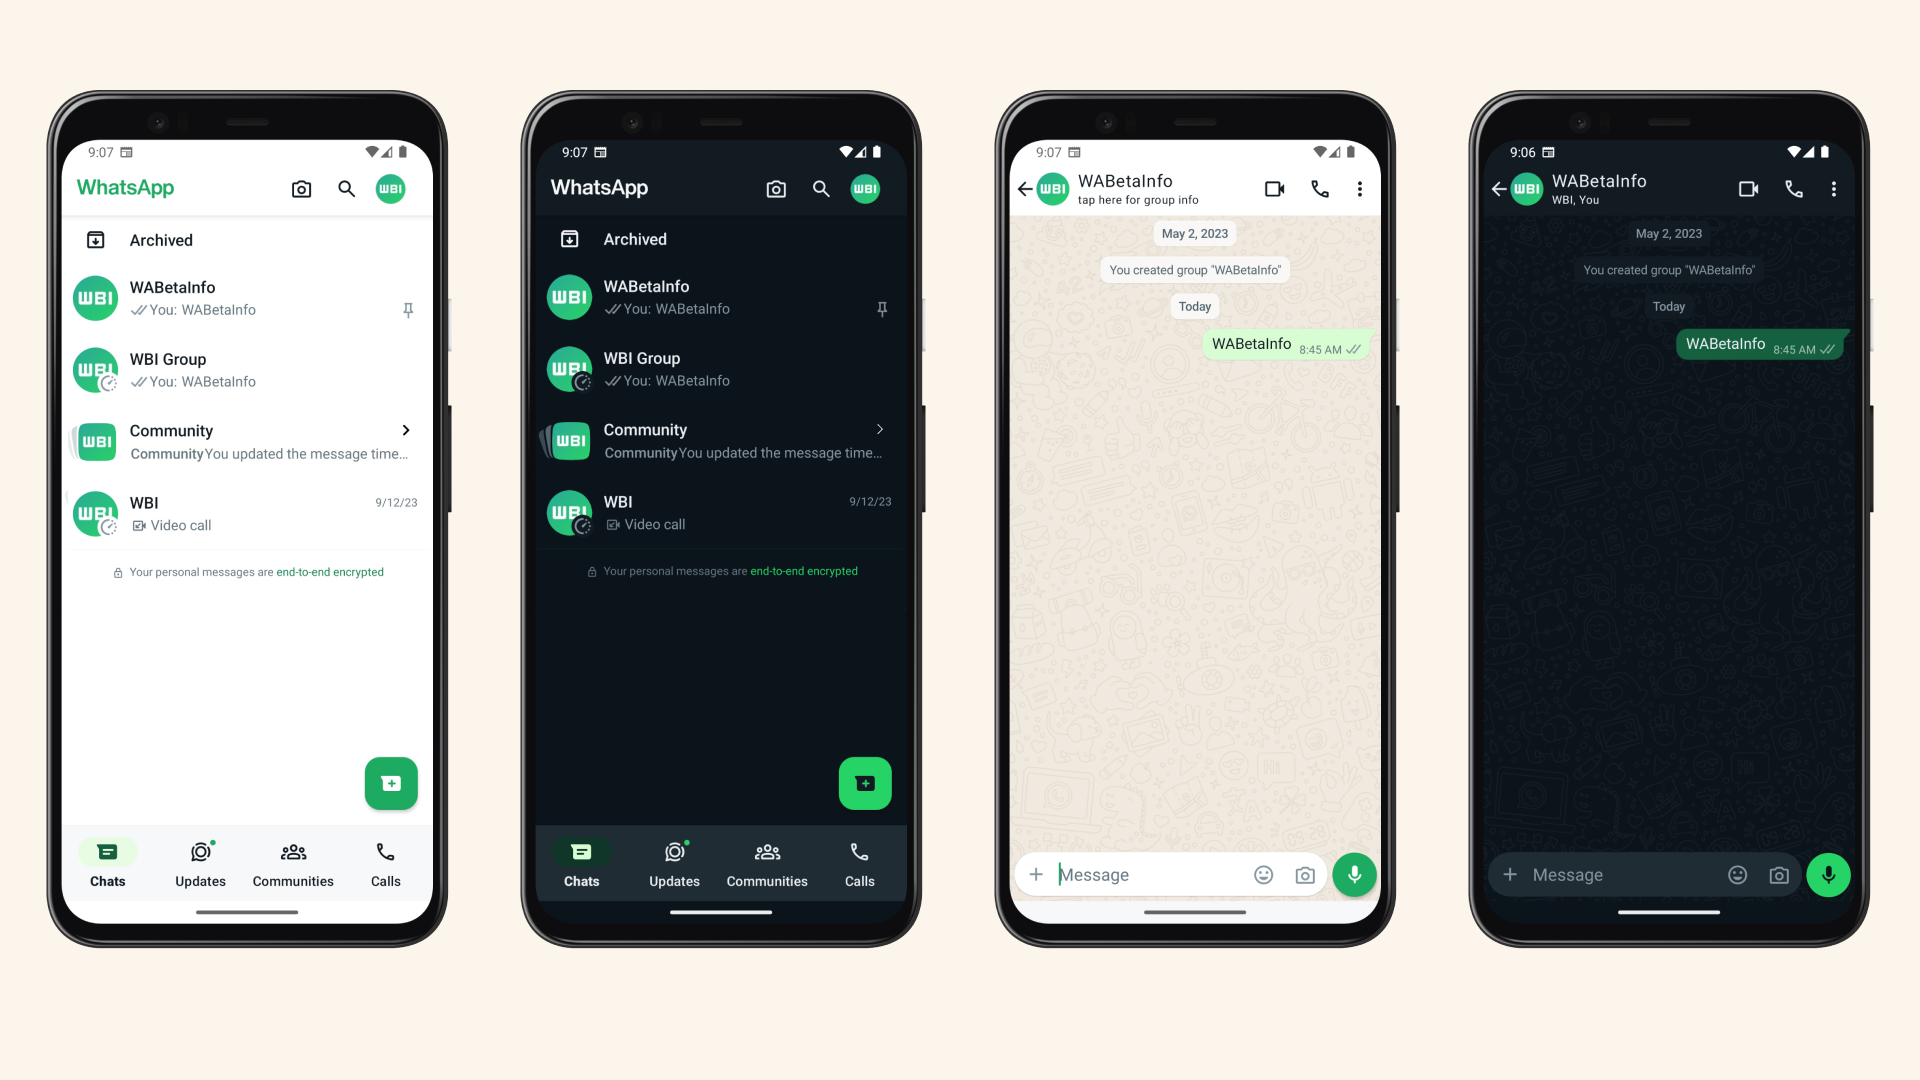 WhatsApp light mode and dark mode showing on four different phones.